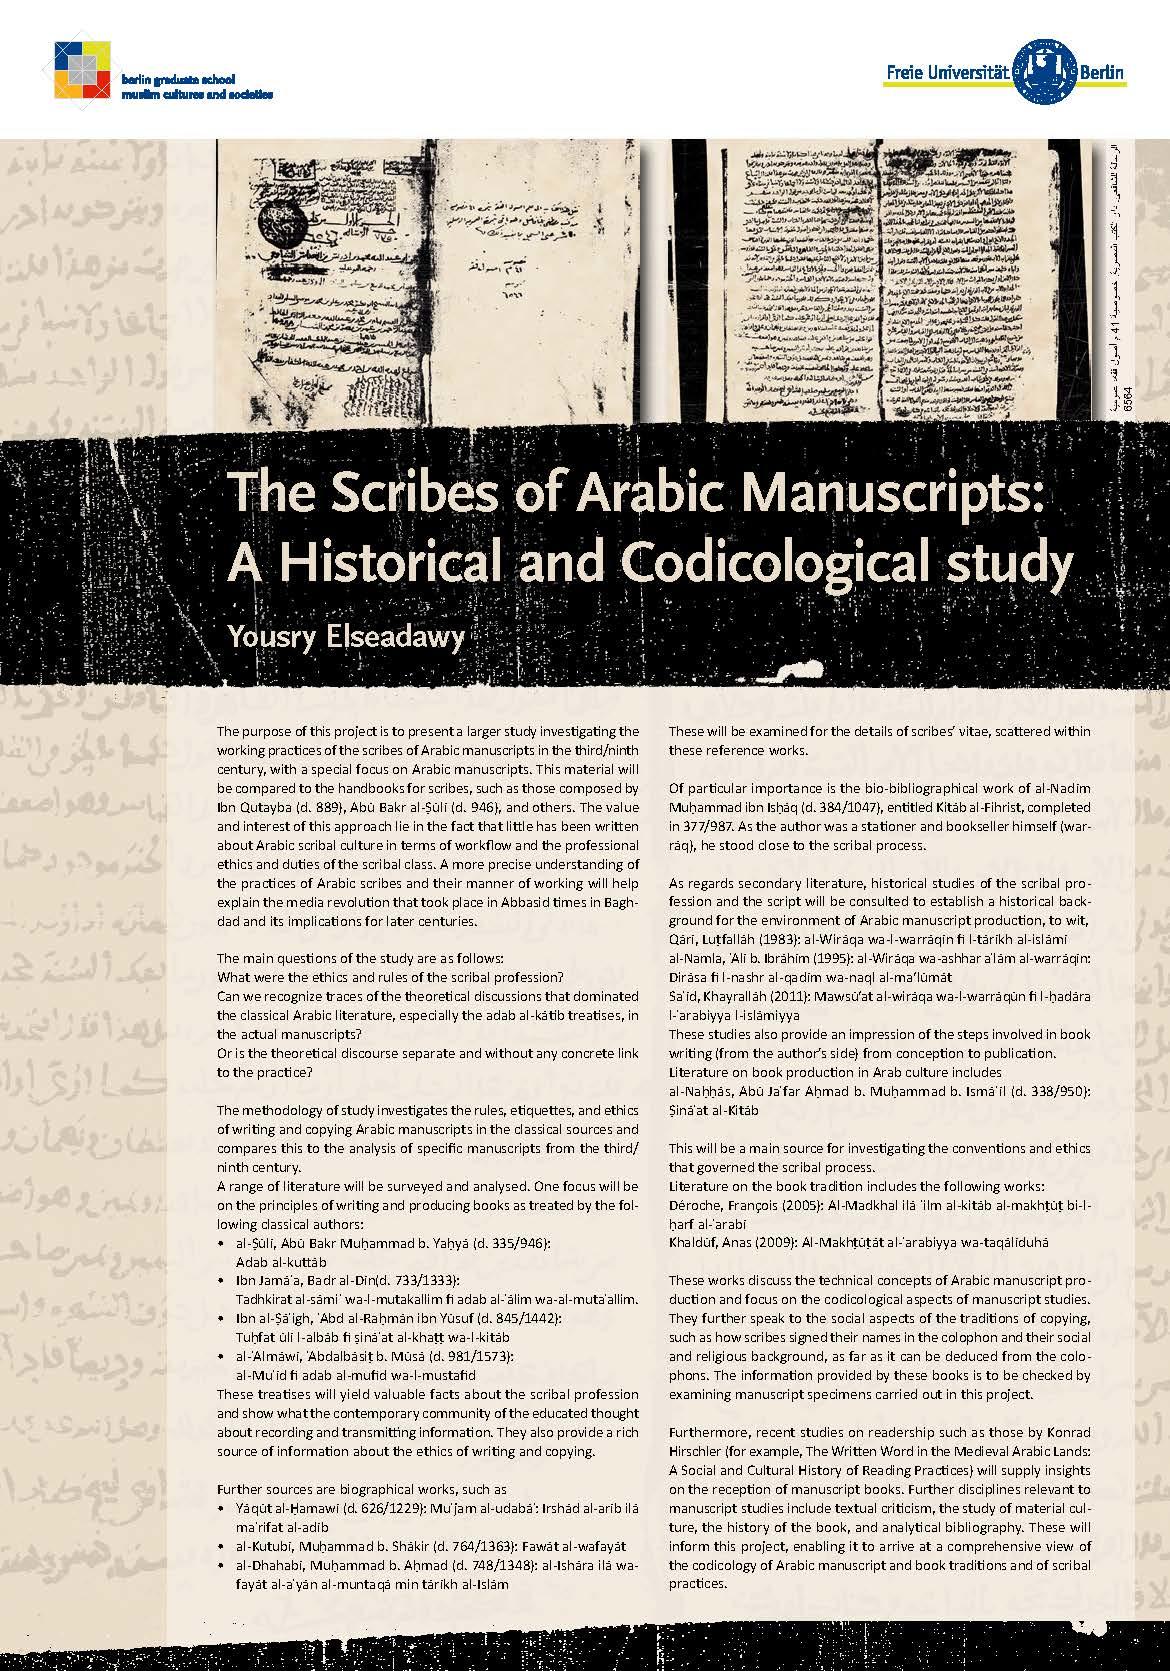 Yousry Elseadawy: "The scribes of Arabic manuscripts. A historical and codicological study"